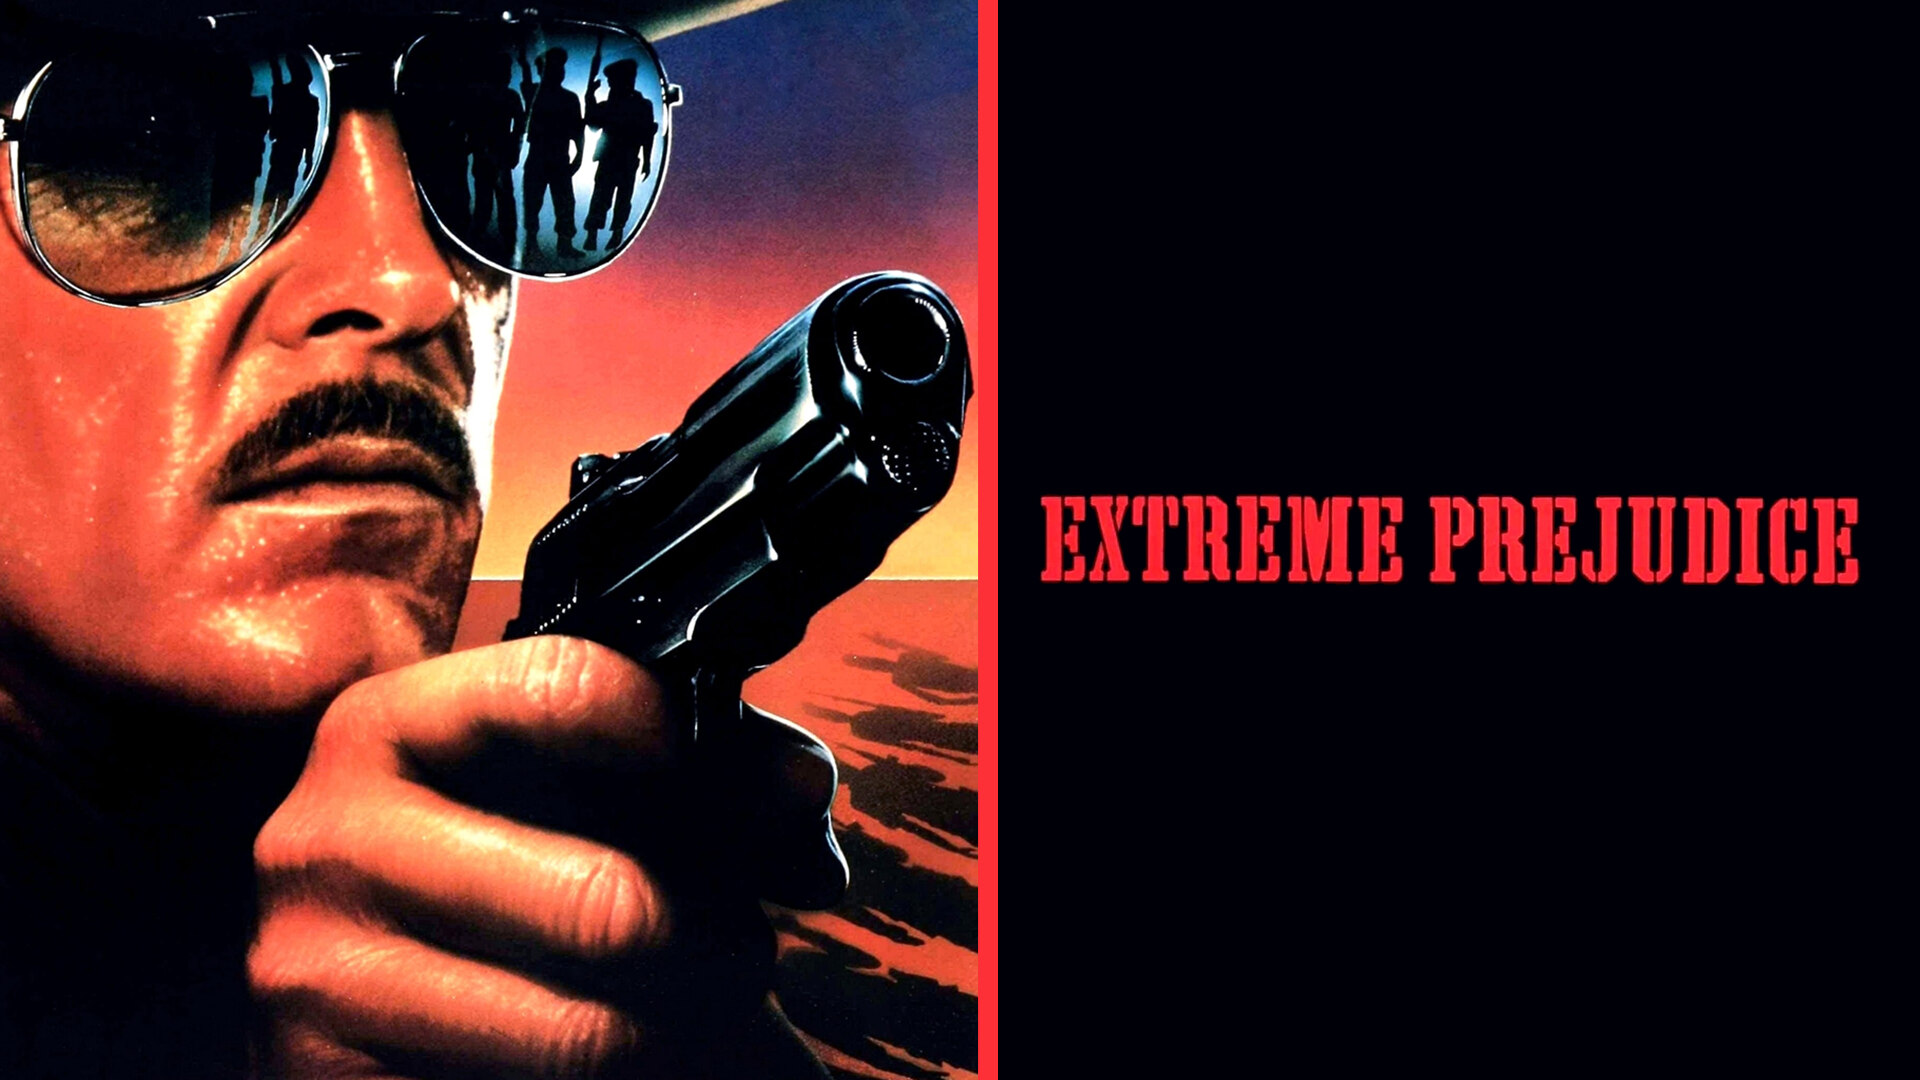 45-facts-about-the-movie-extreme-prejudice